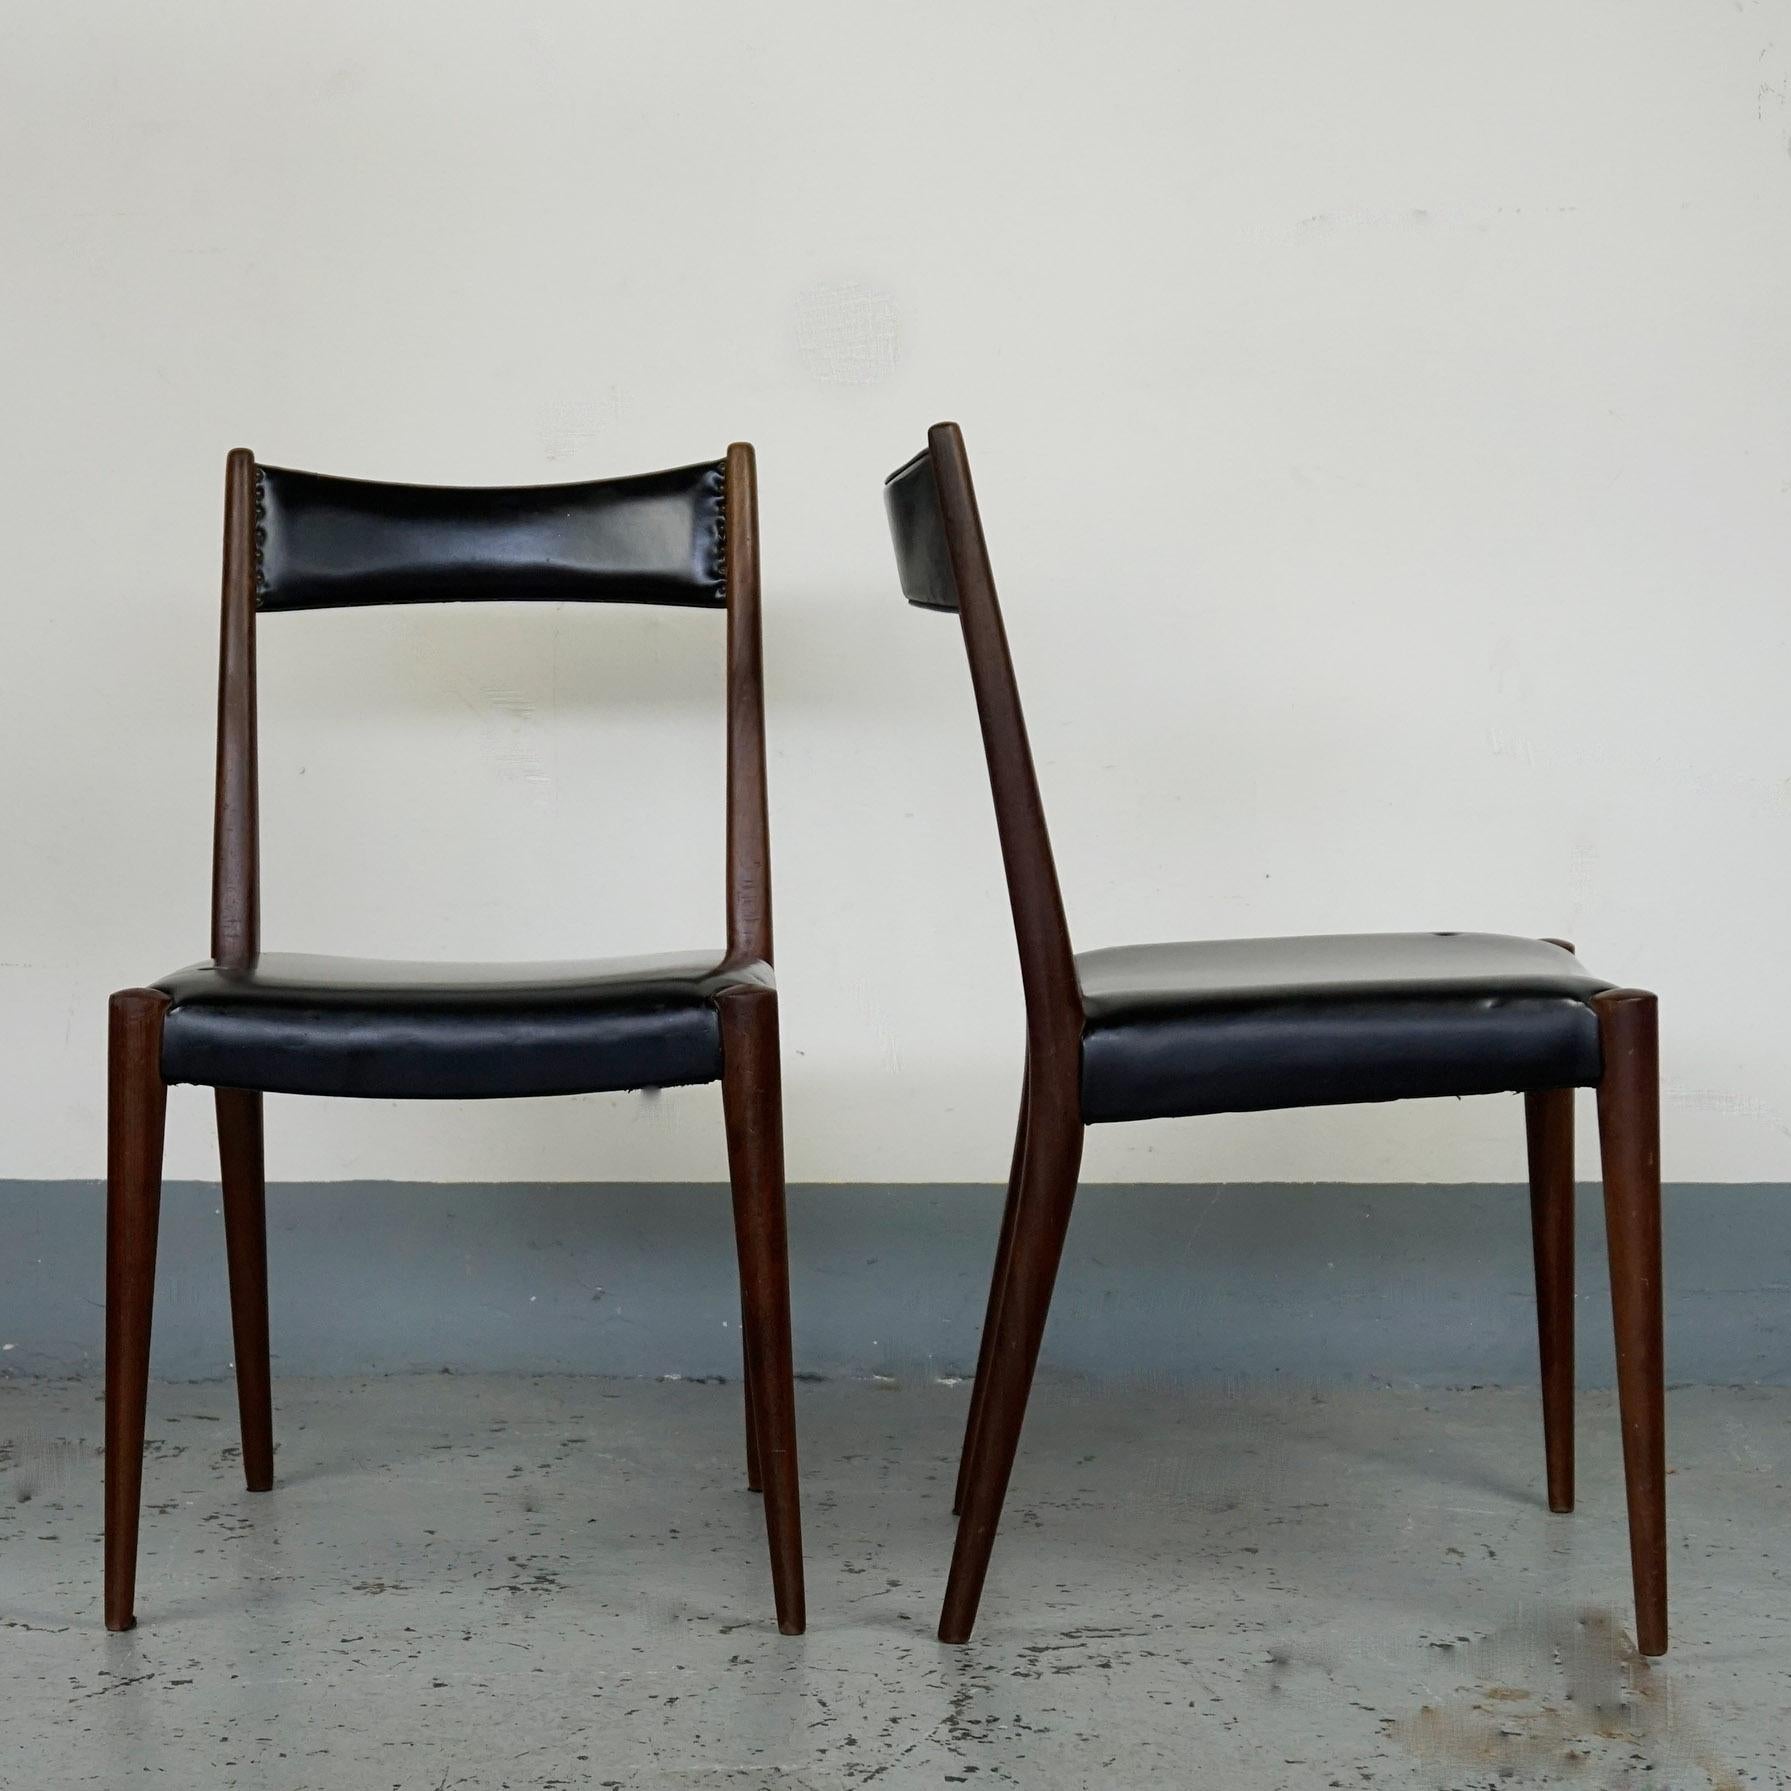 Rare pair of chairs designed by Anna Lülja Praun, together with Margarete Schütte Lihotzky the most important female Austrian Post War Architects. Influenced by Personalitys as Eileen Gray, Josef Frank and Clemens Holzmeister she created pure and